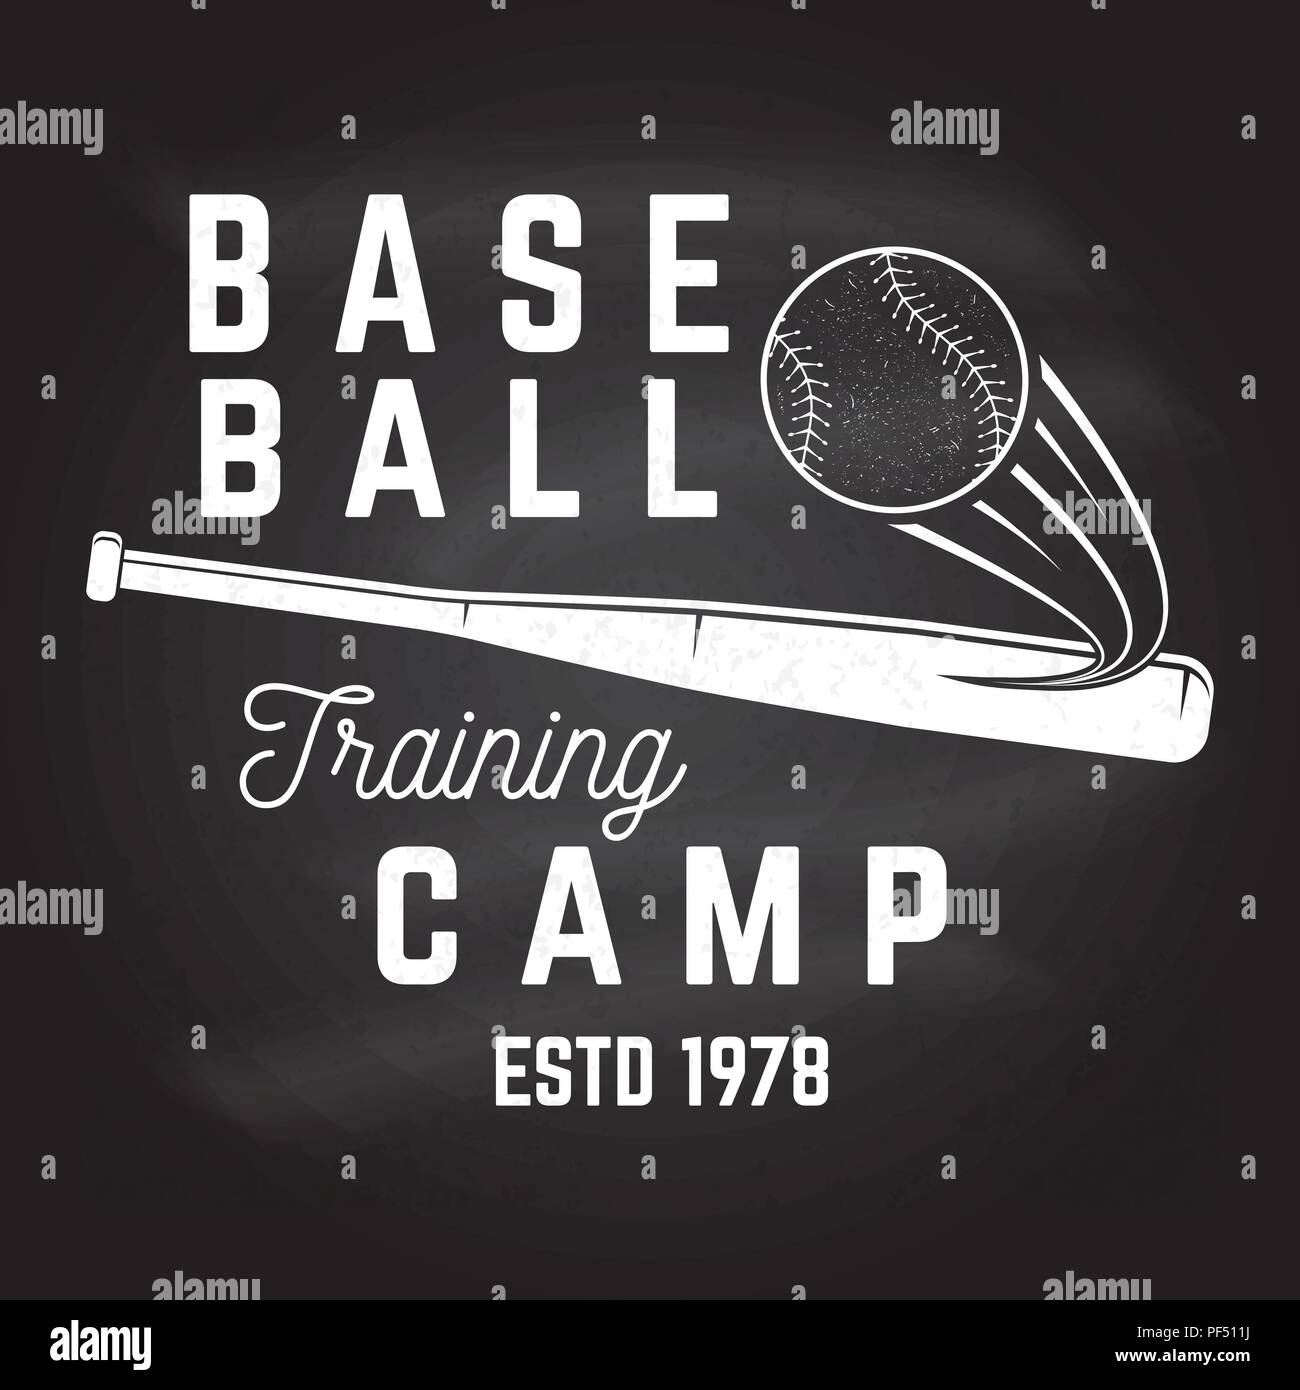 Baseball training camp on the chalkboard. Vector illustration. Concept for shirt or logo, print, stamp or tee. Vintage typography design with baseball bat and ball for baseball silhouette. Stock Vector